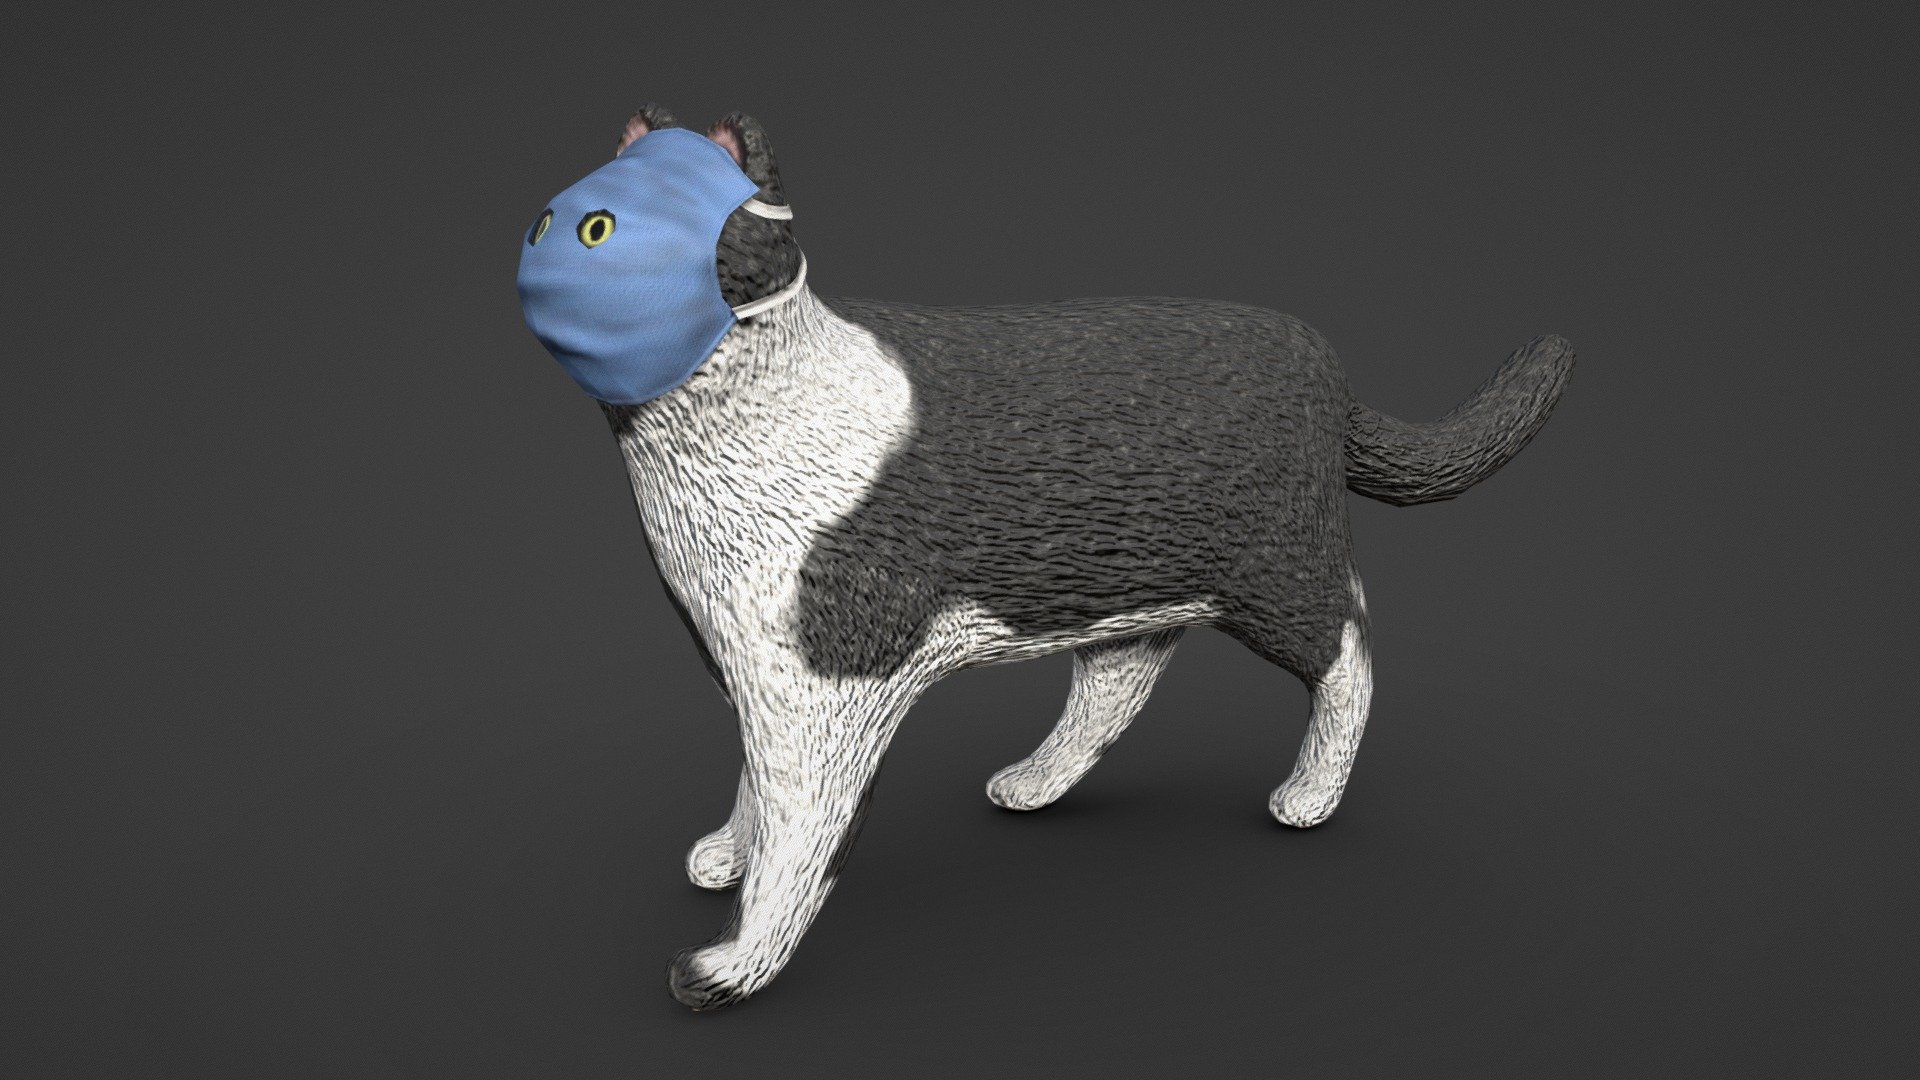 Cat wearing a corona virus mask during the pandemic.

Inspired by this cute miniature: https://twitter.com/meetissai/status/1227044107651936256?s=20

Blender and substance painter, 1K texture set 3d model